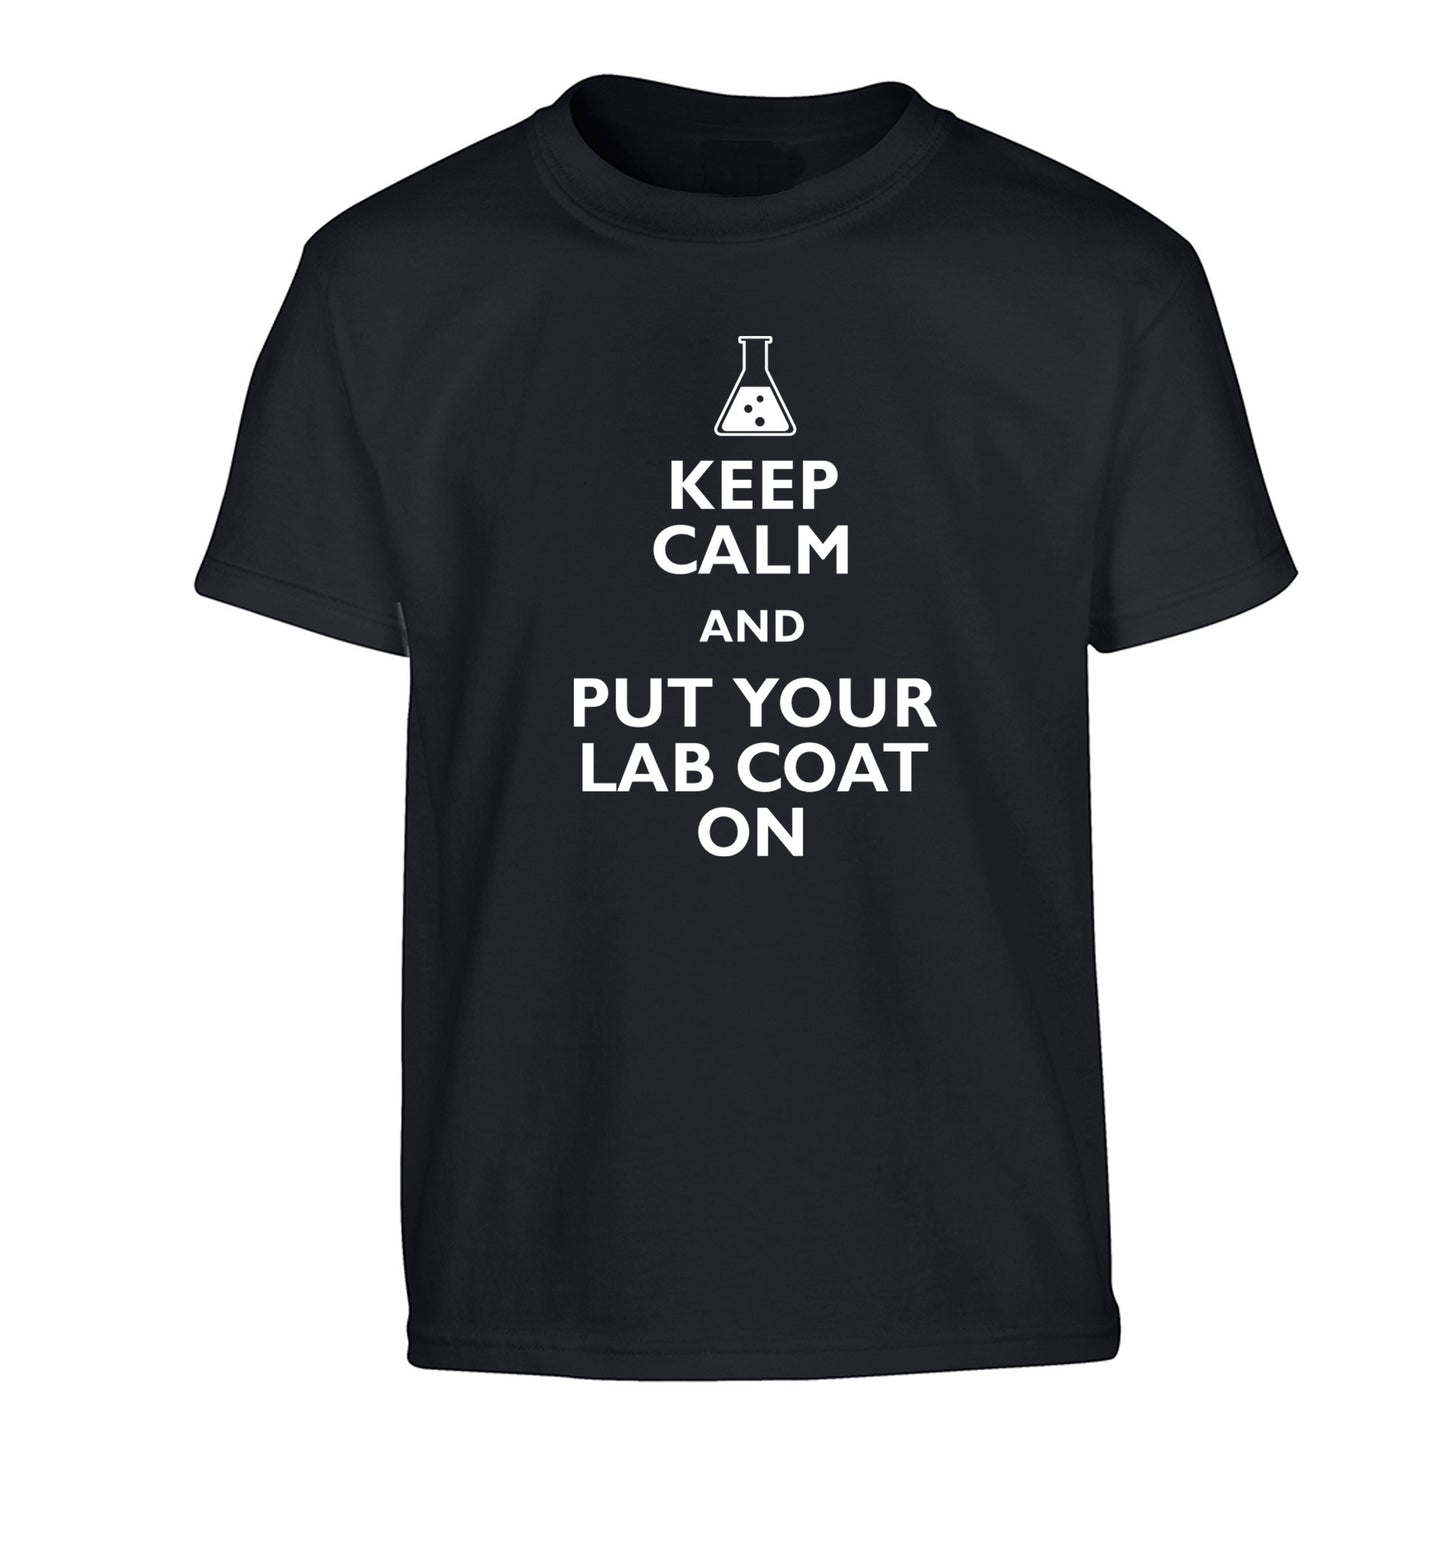 Keep calm and put your lab coat on Children's black Tshirt 12-14 Years